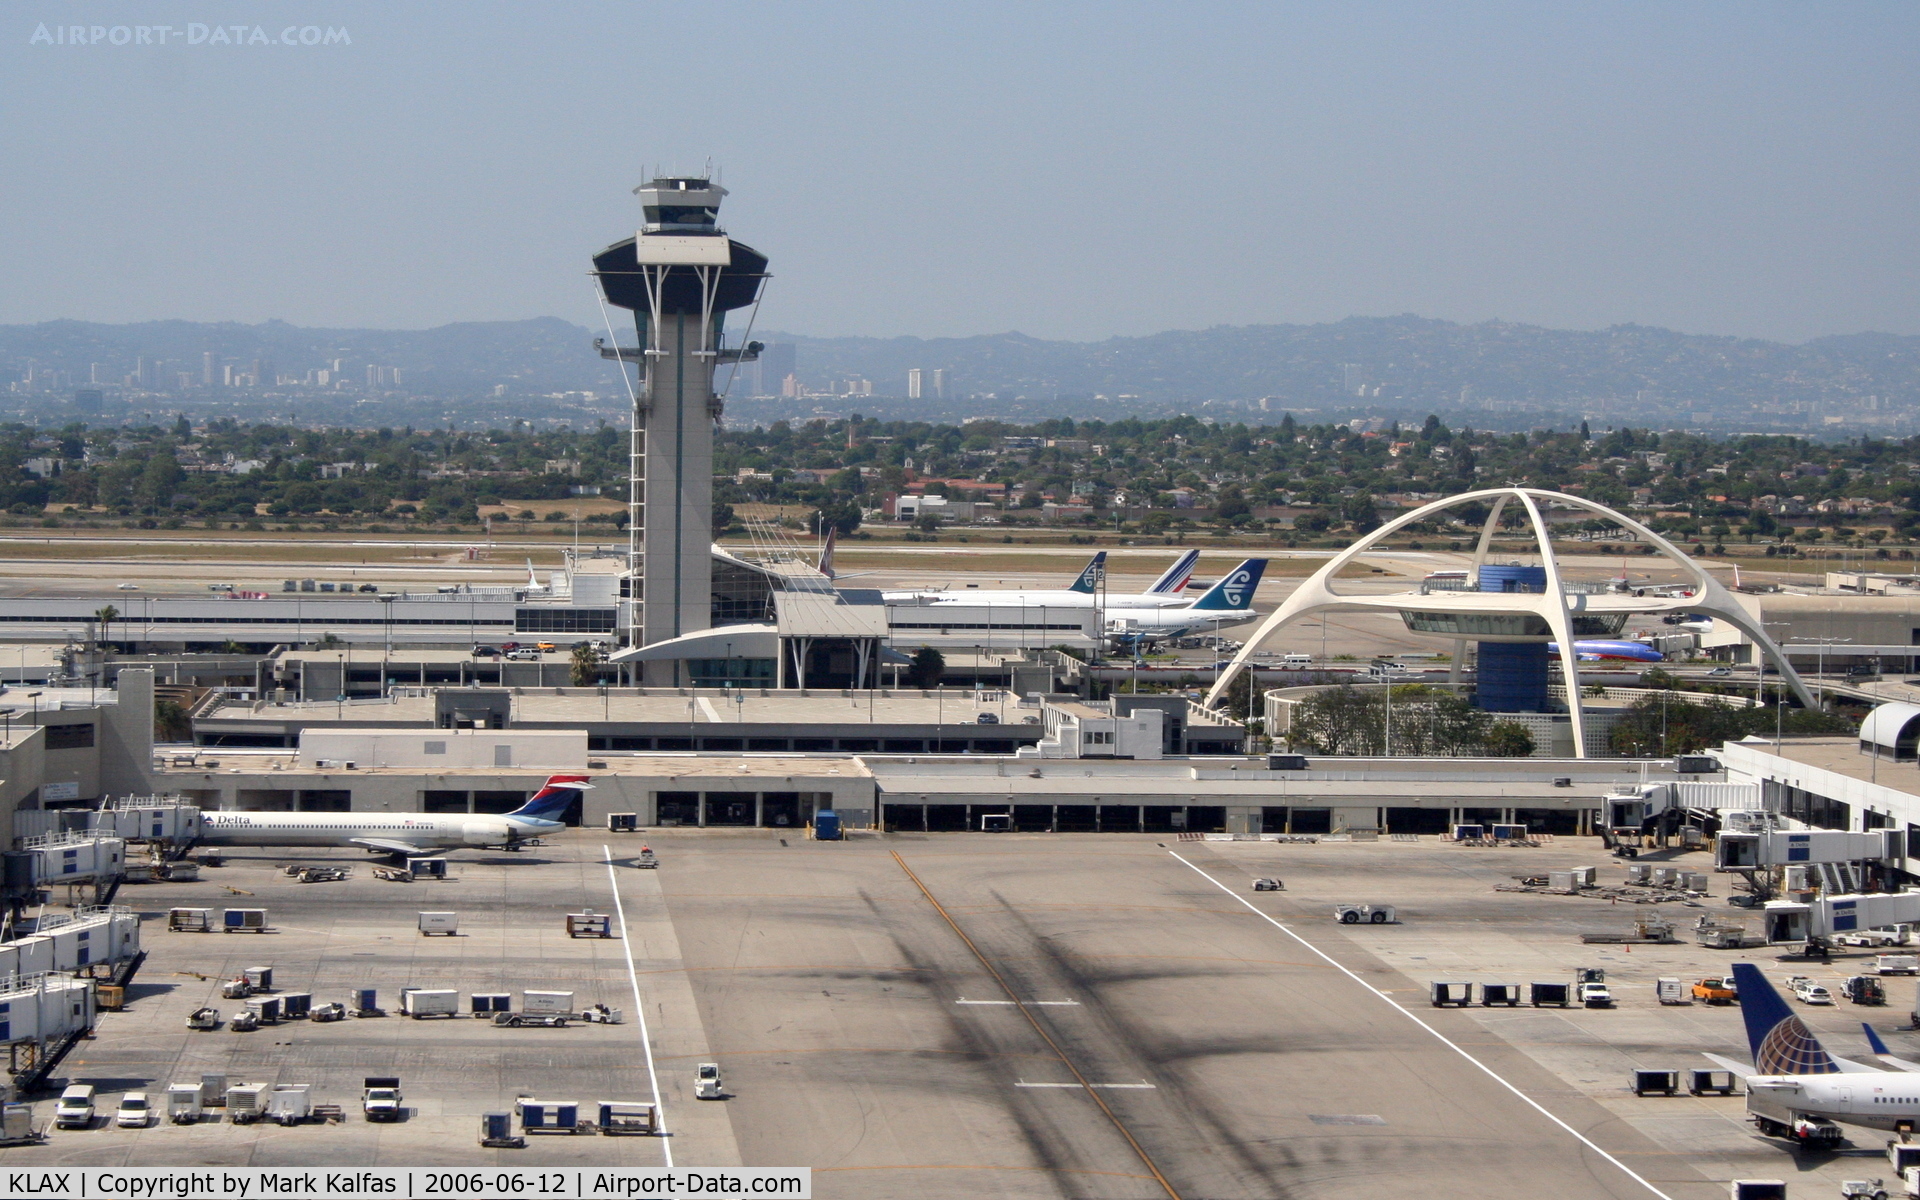 Los Angeles International Airport (LAX) - LAX tower and Encounters Restaurant